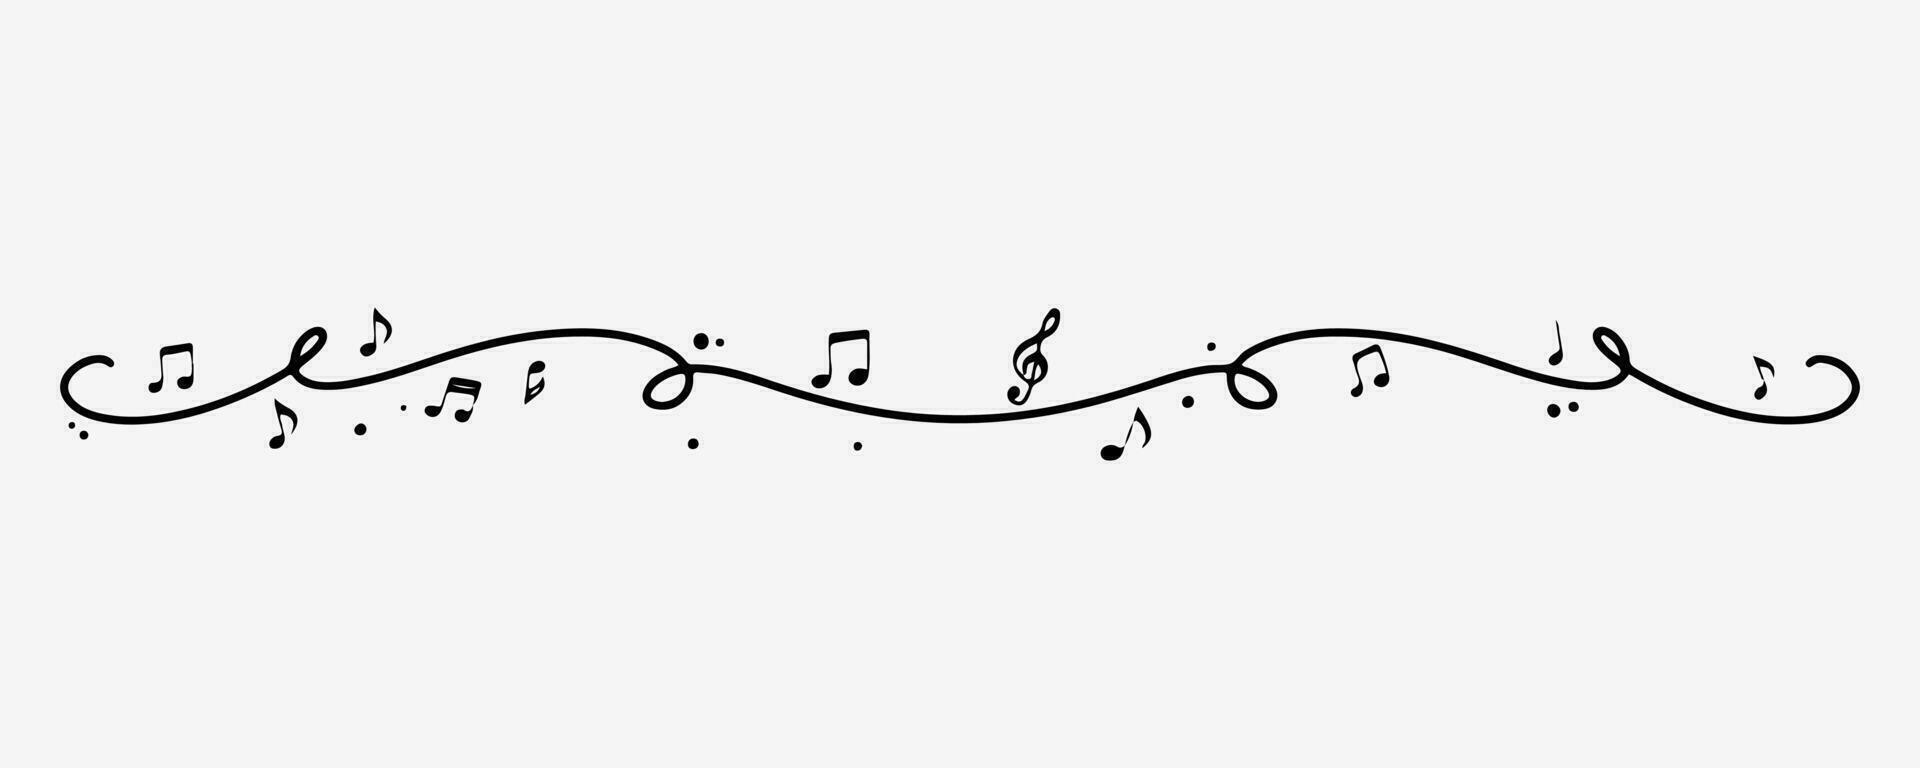 Hand drawn music dividers. Hand drawn music divider in doodle style. Drawn shapes doodle. Handdrawn decorative art shape. Vector EPS 10